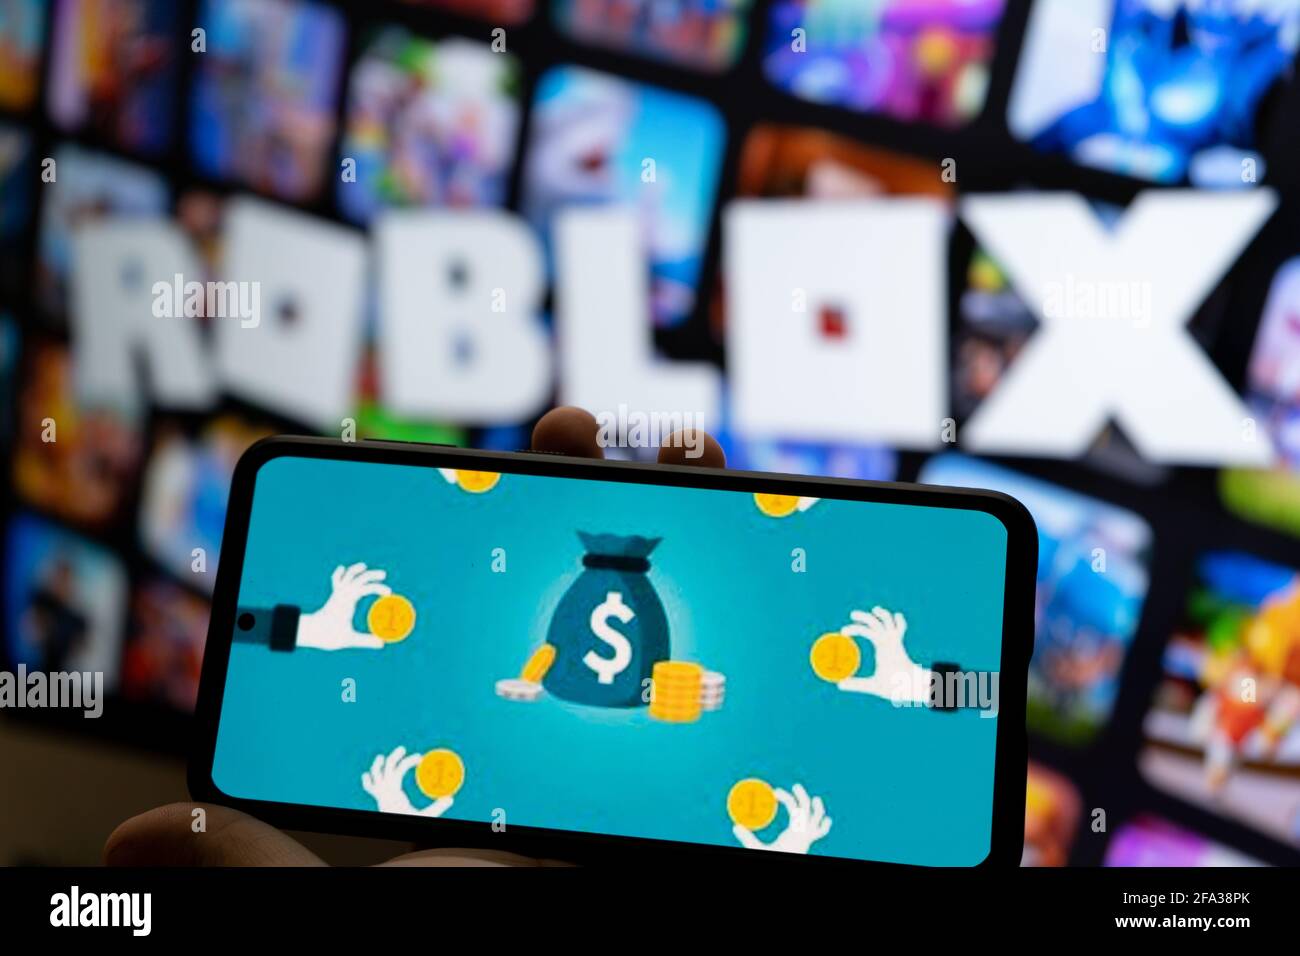 Roblox game app on the smartphone screen on blue background. Top view. Rio  de Janeiro, RJ, Brazil. June 2021. Stock Photo